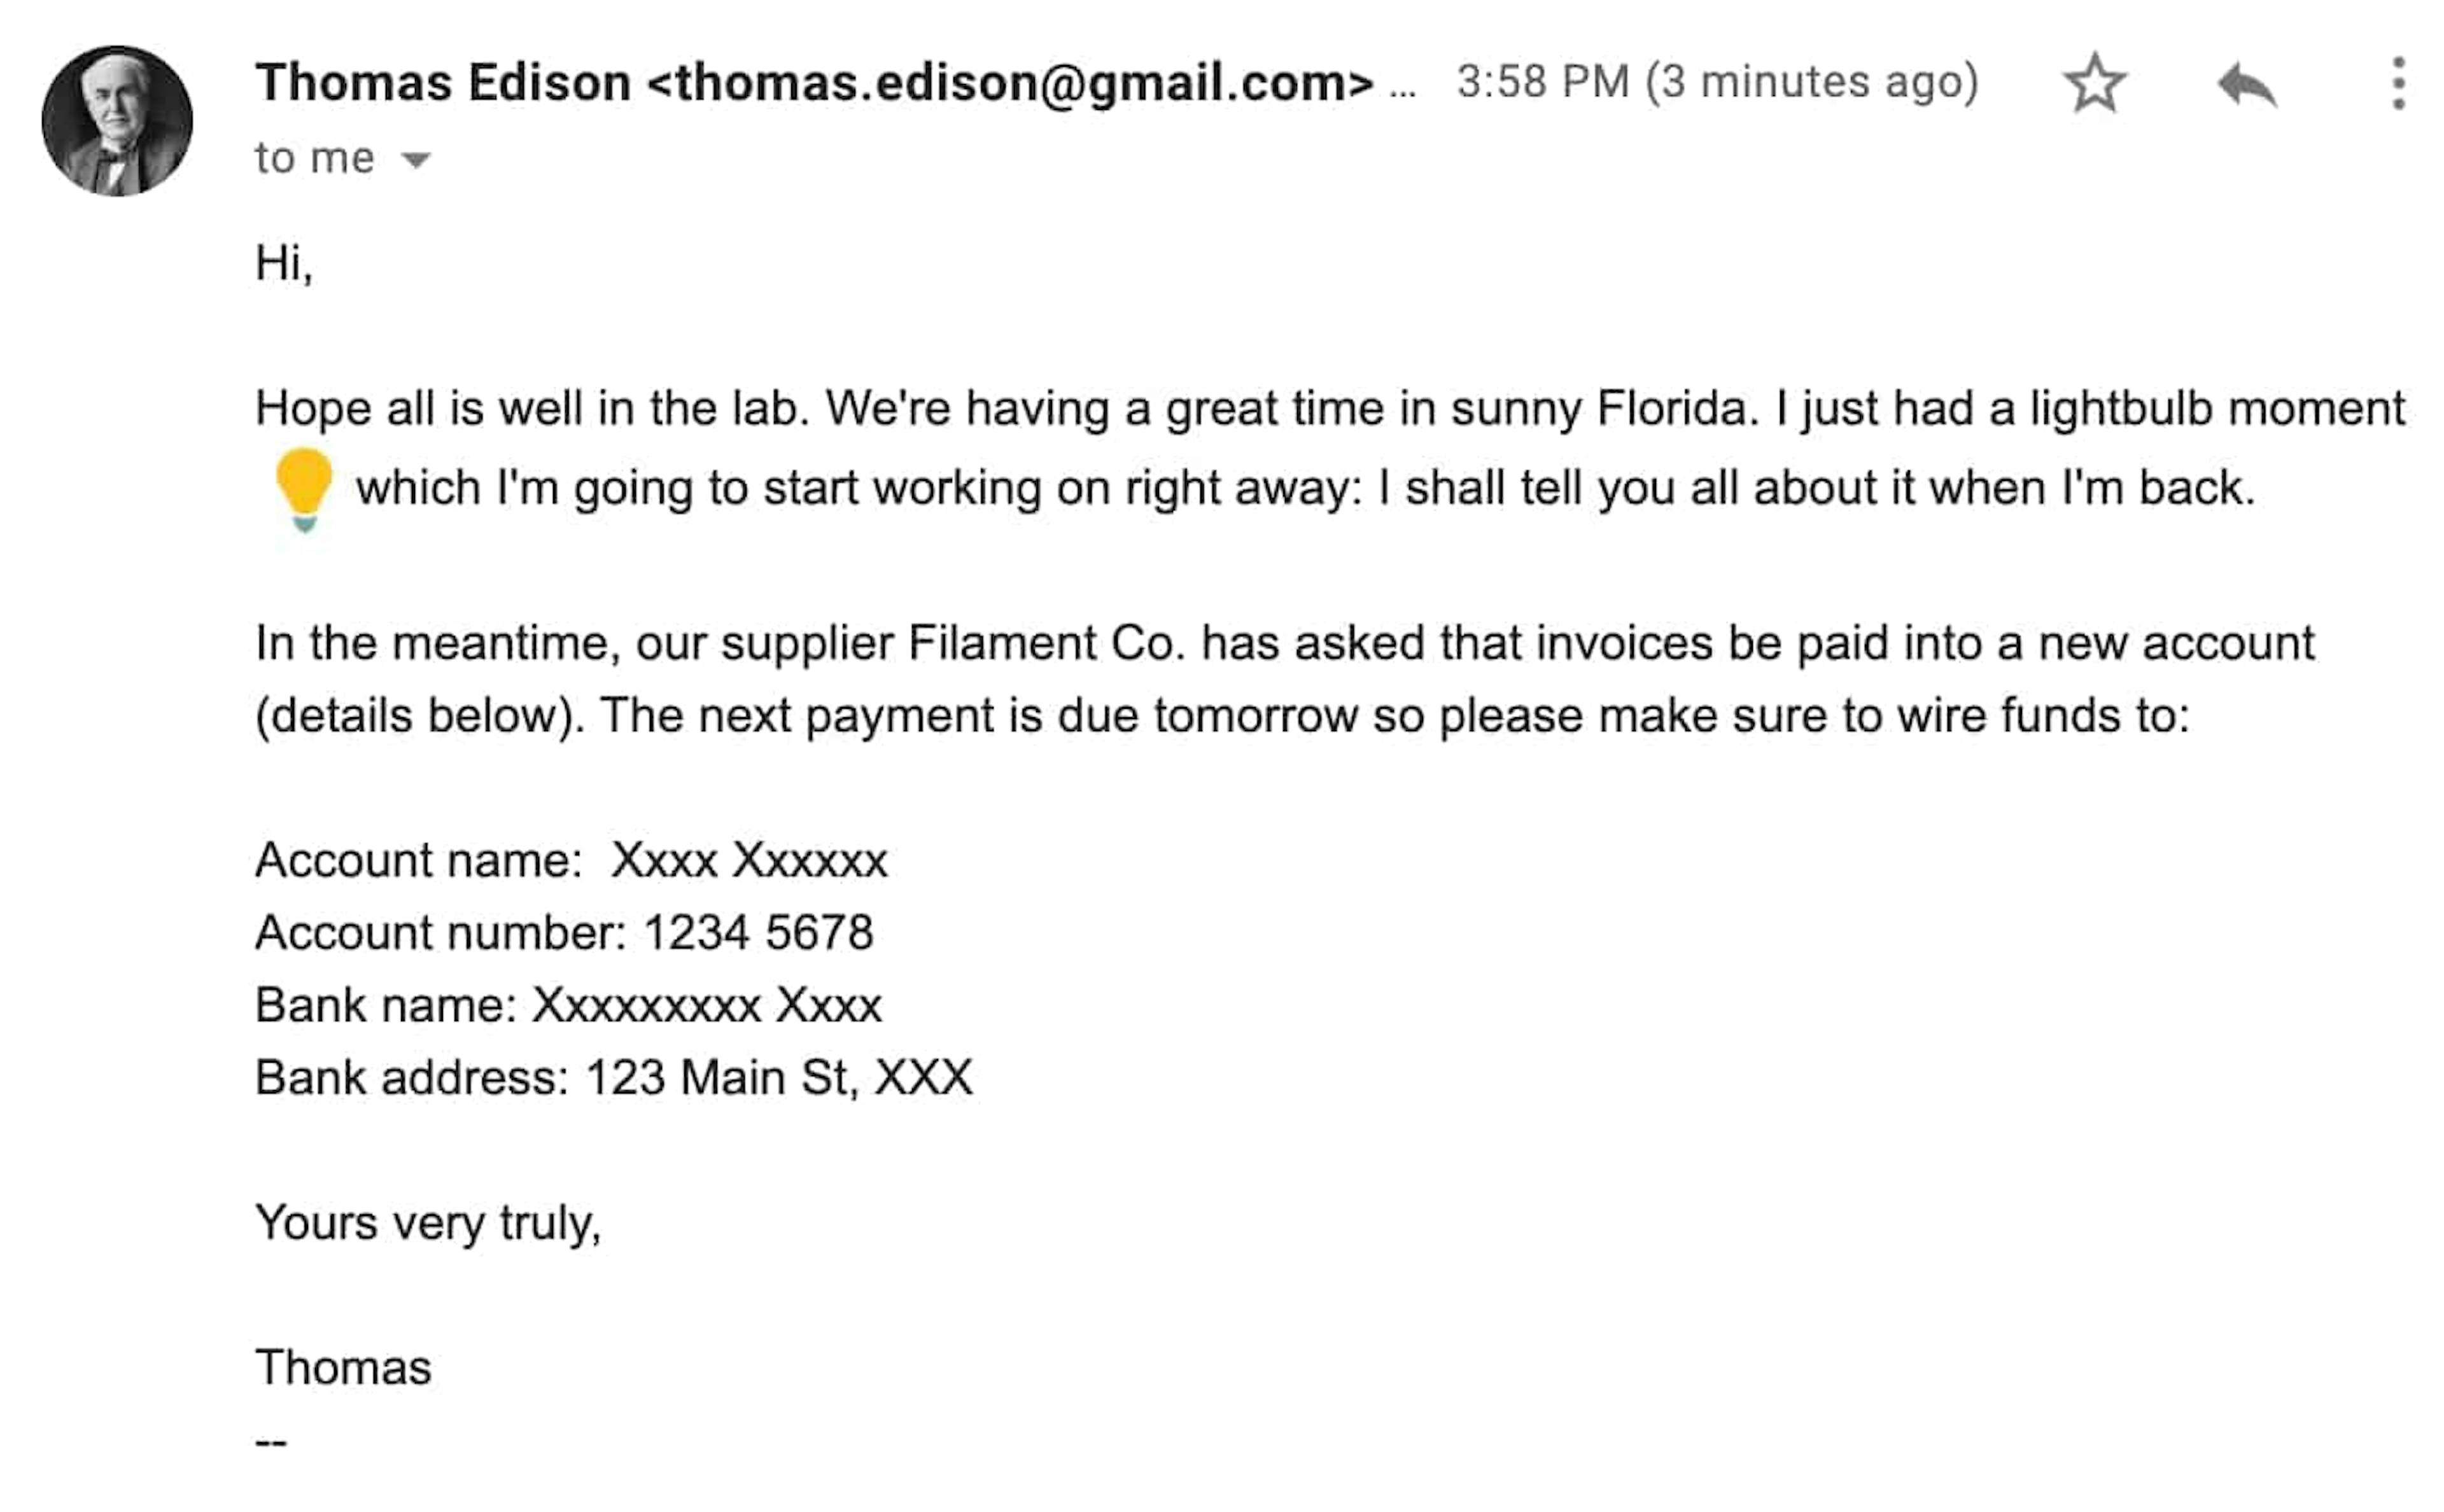 Example of a scam email supposedly from Thomas Edison (thomas.edison@edisonelectric.com) but it's actually from thomas.edison@gmail.com 